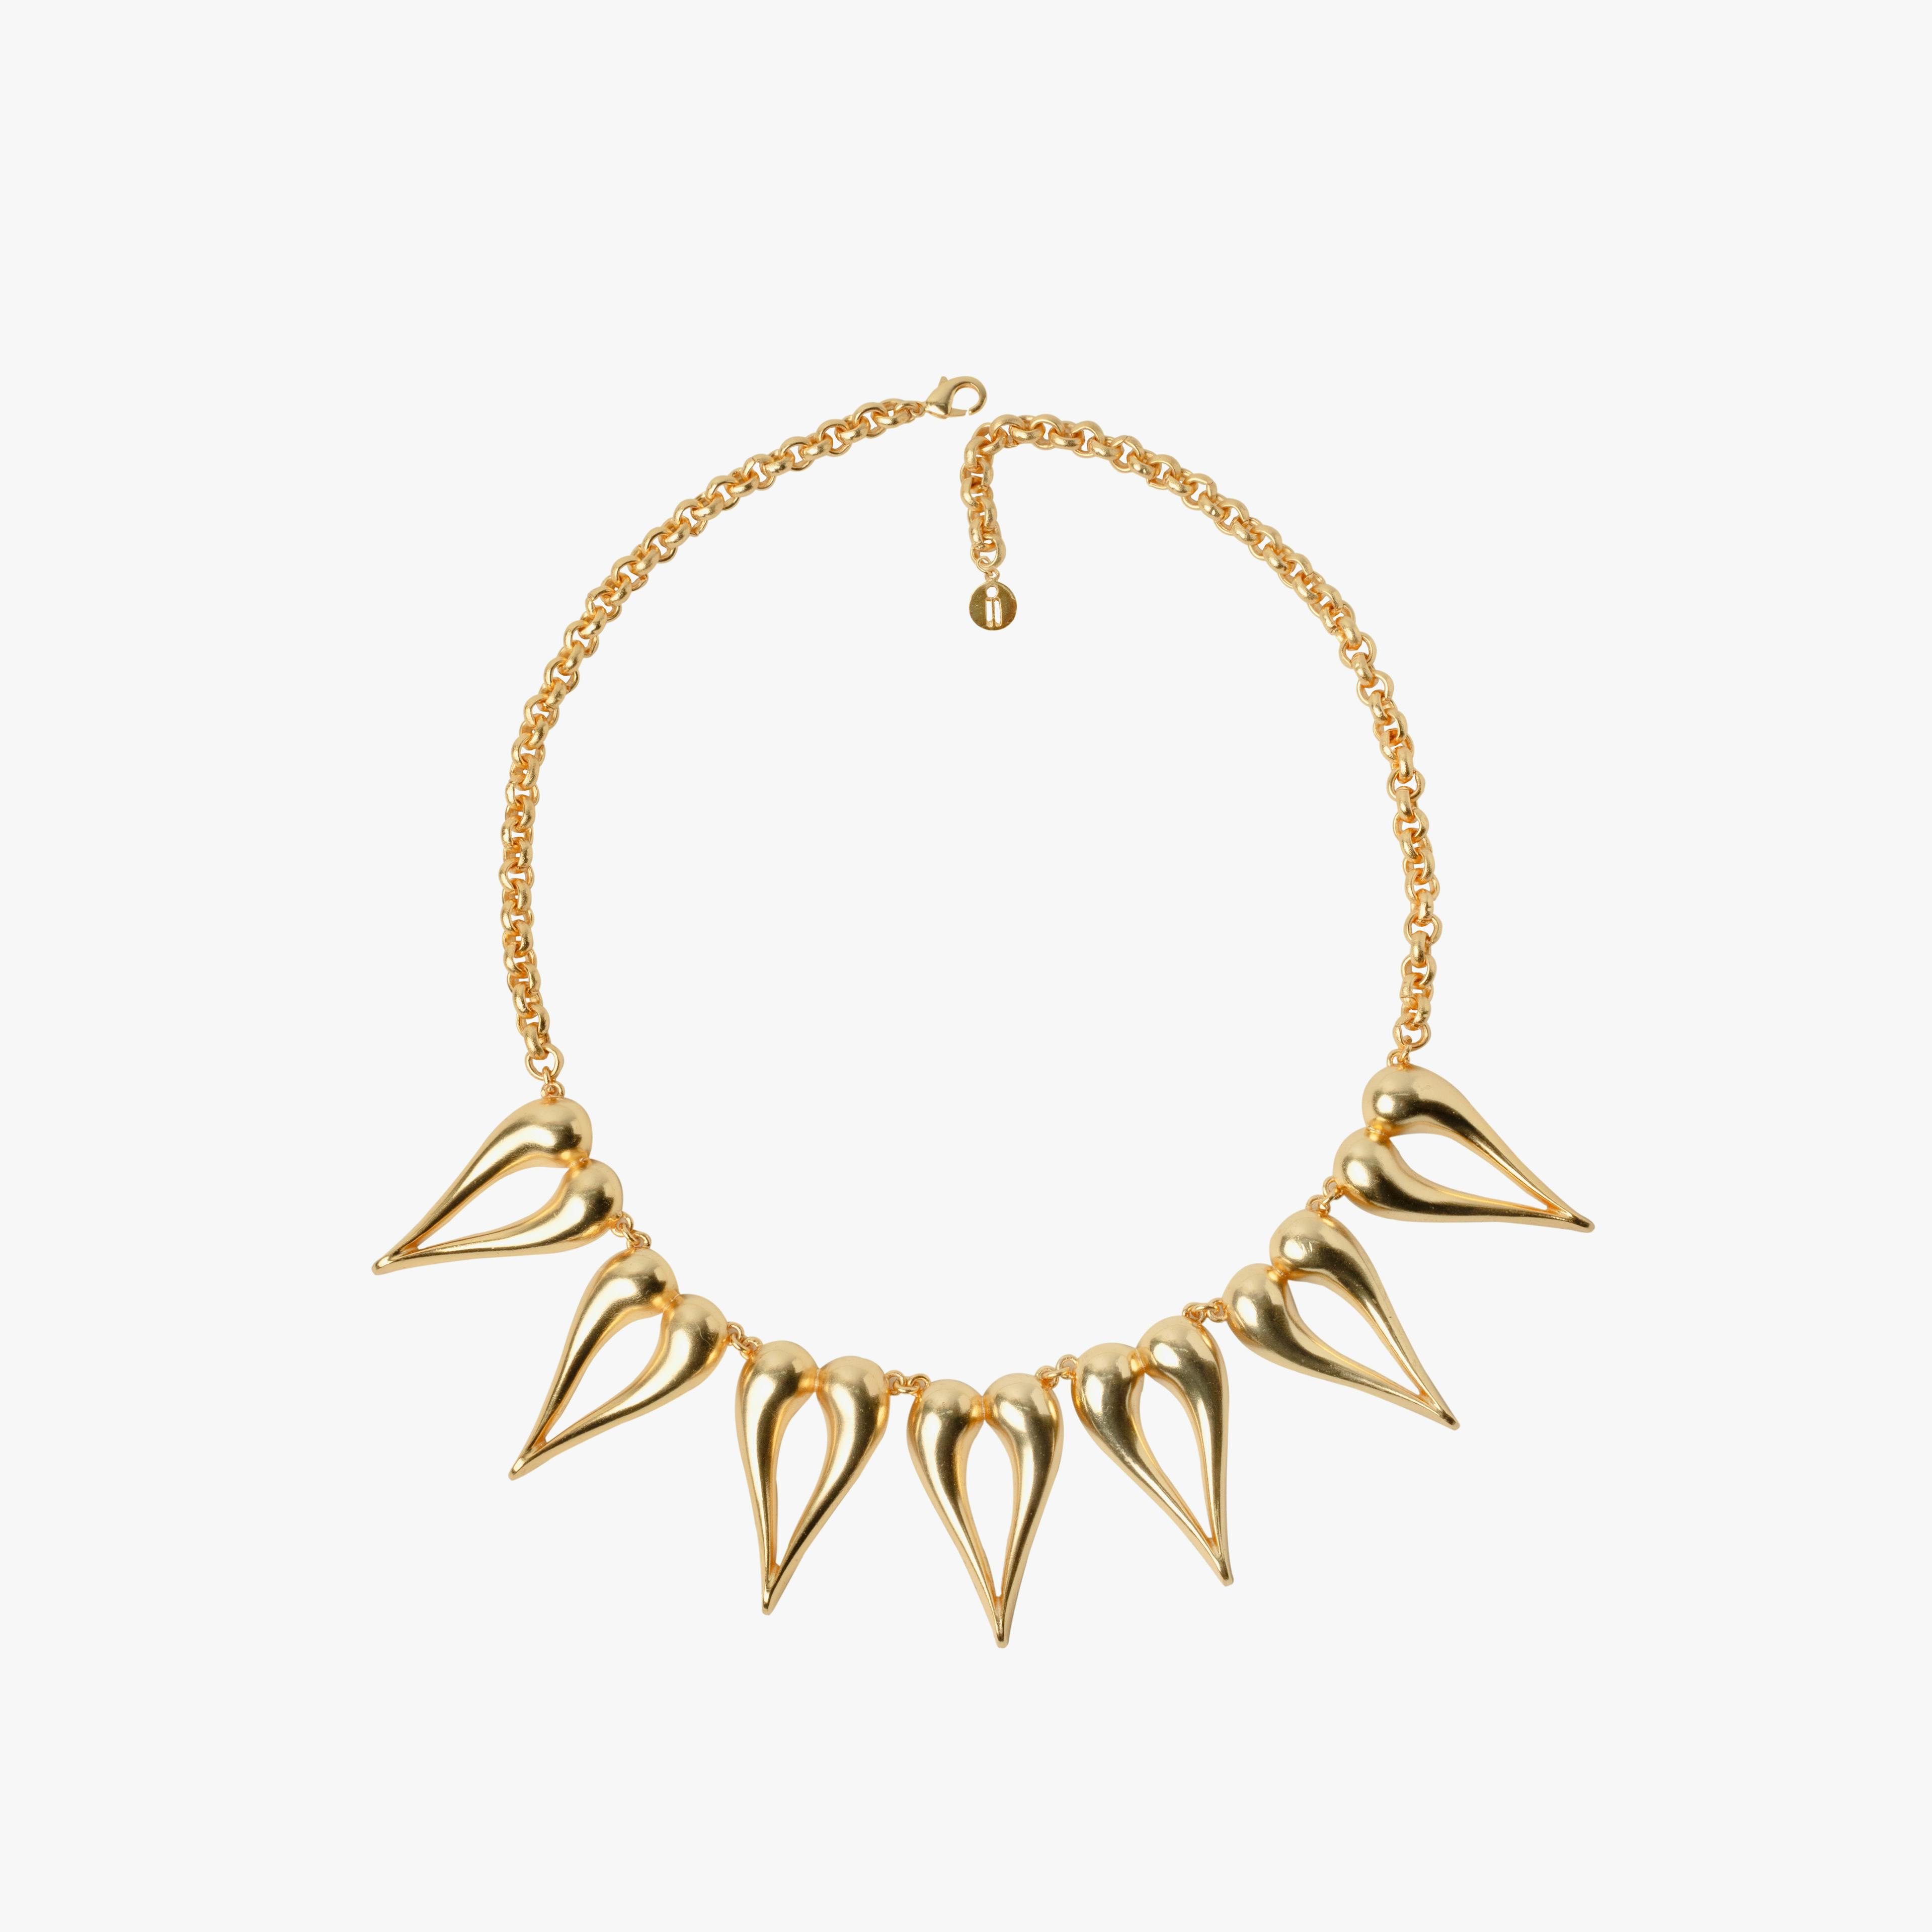 VENUS NECKLACE GOLD TONE , a product by Equiivalence